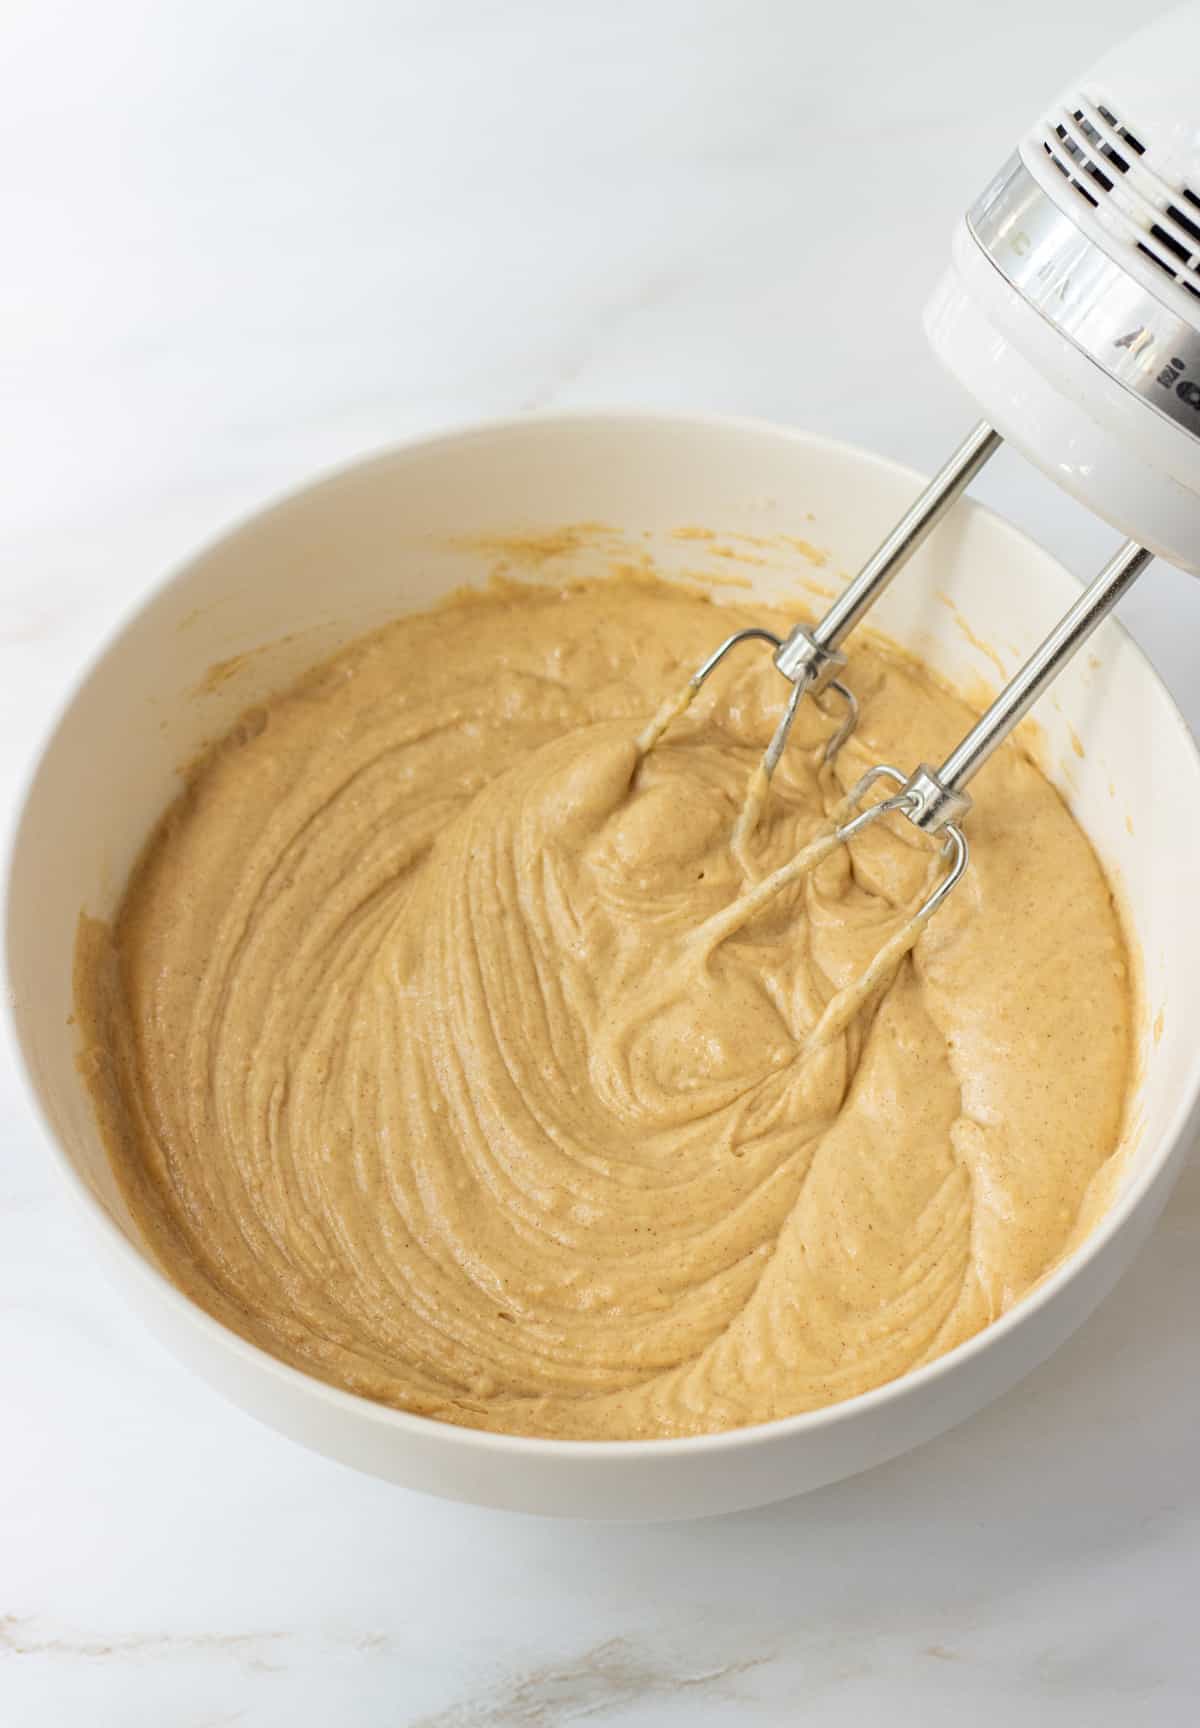 Cinnamon muffin batter in a bowl with beaters.